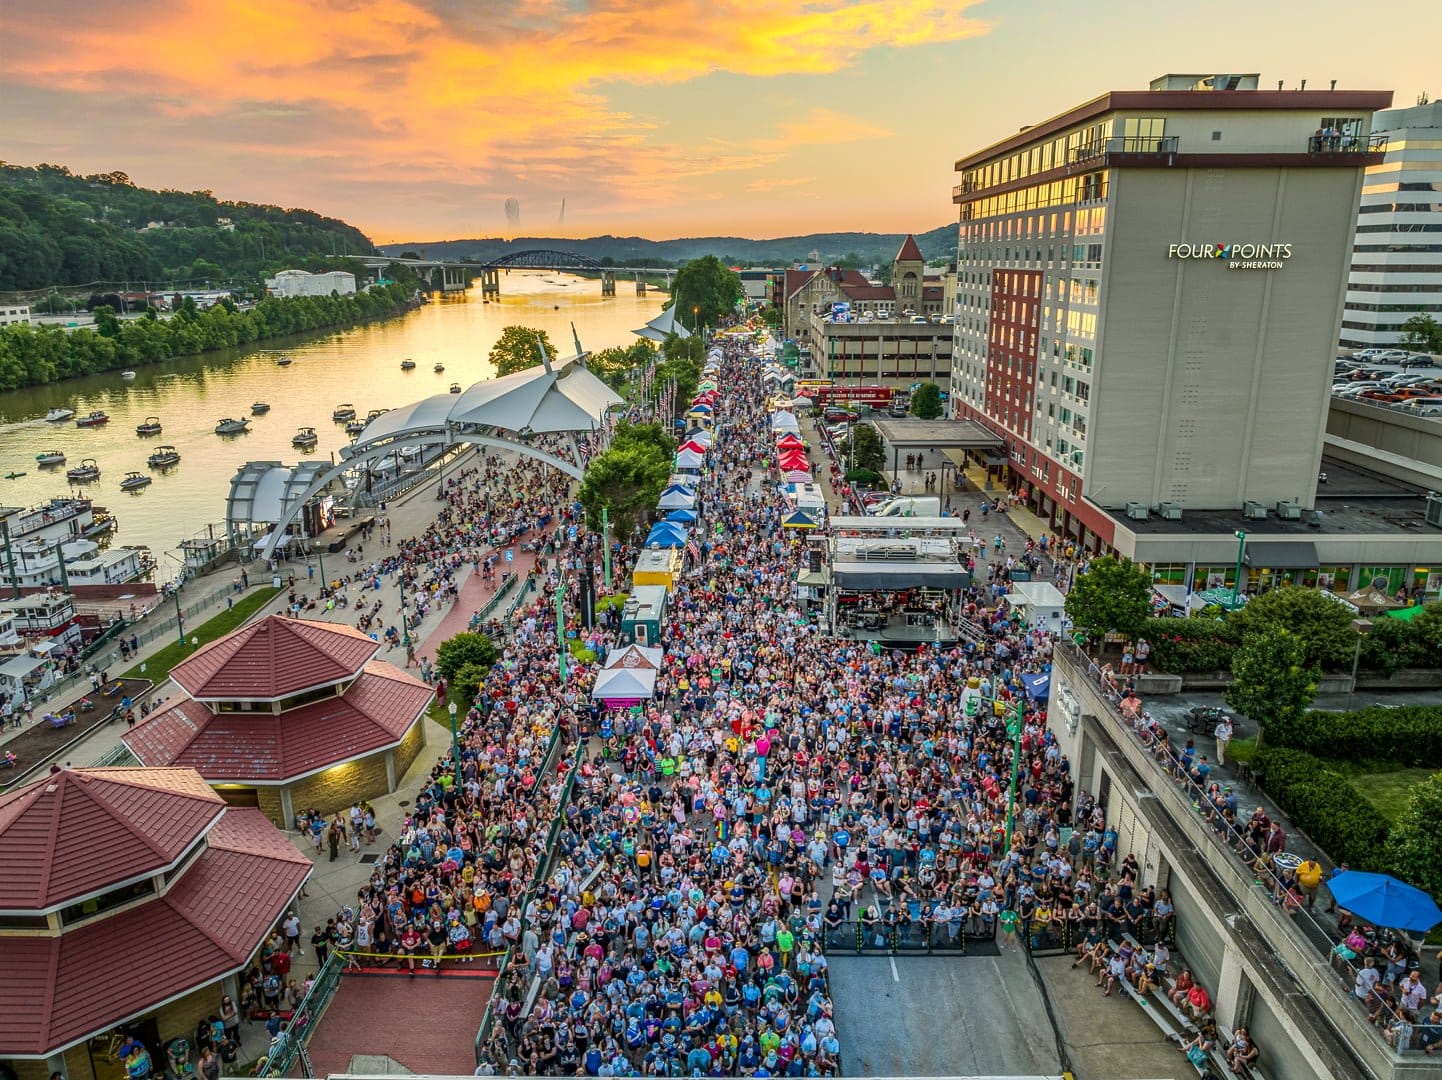 Throngs of people at the Charleston Sternwheel Regatta along the river